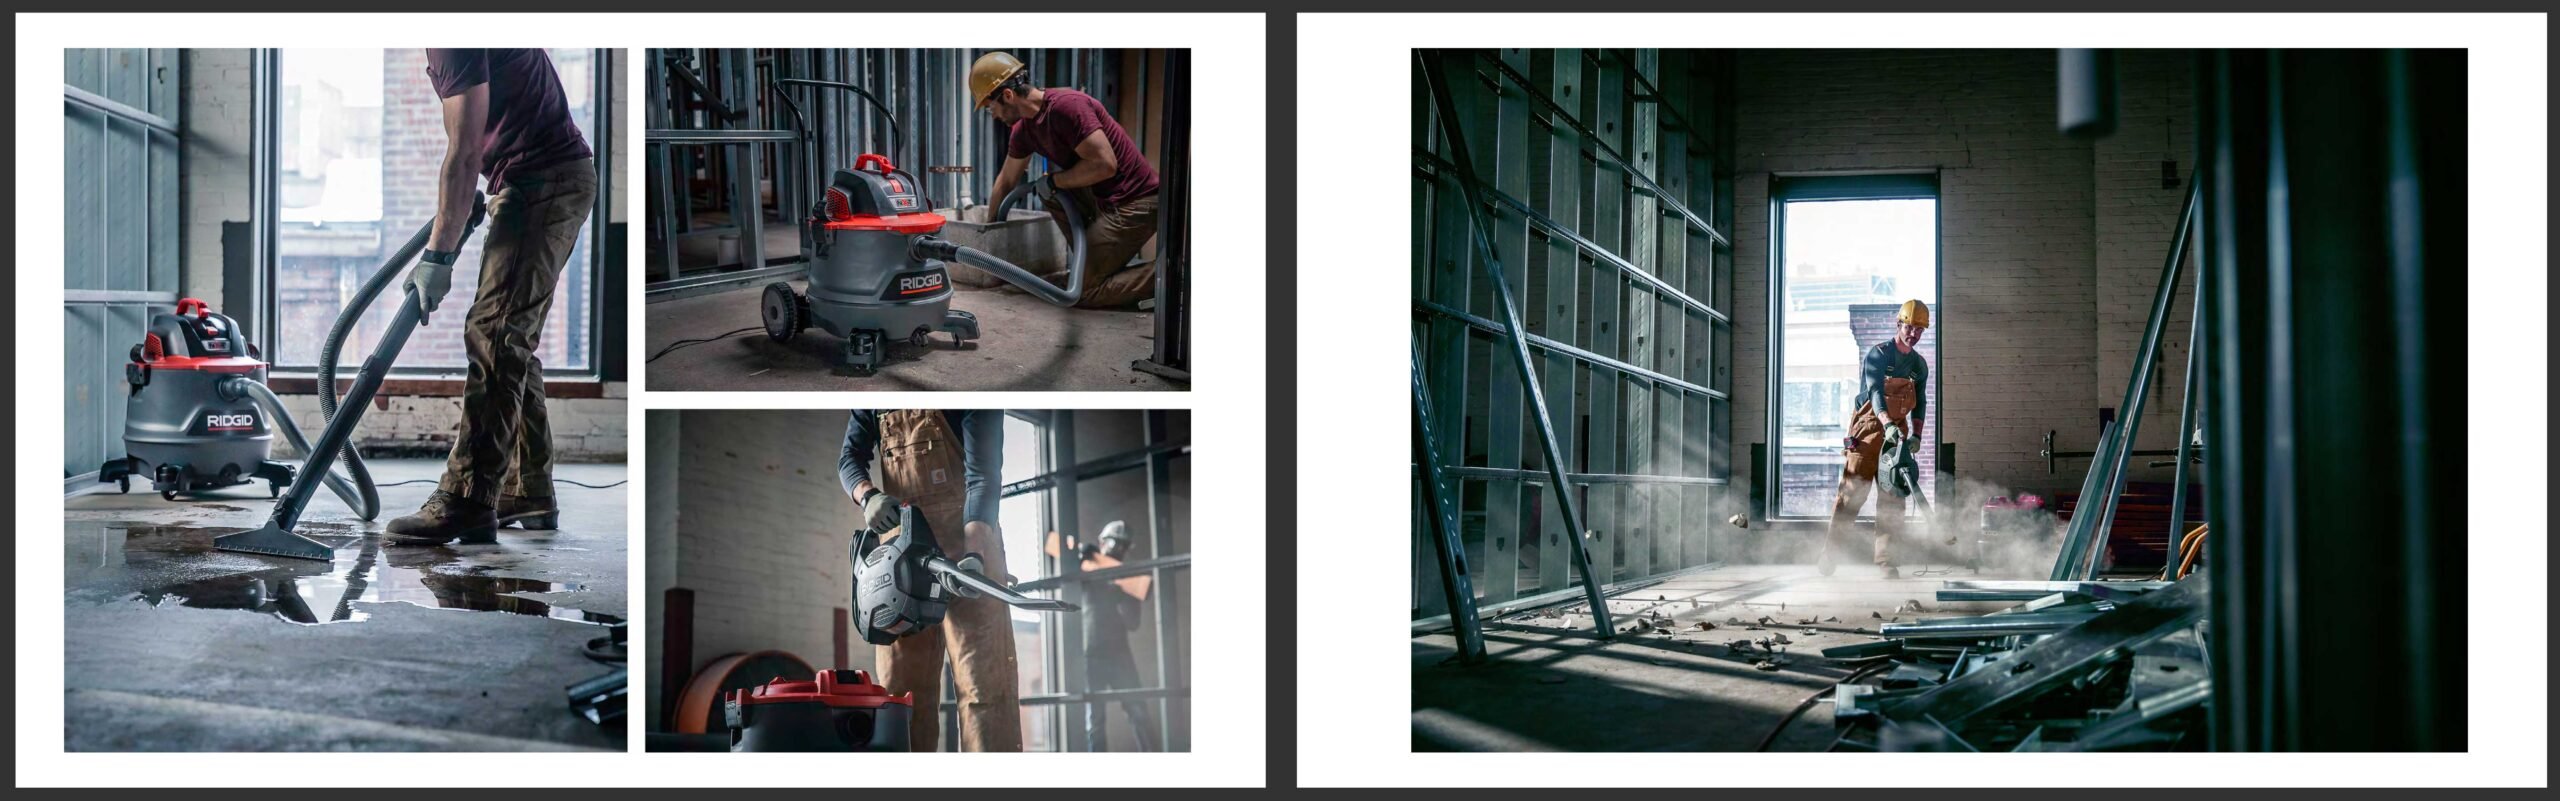 Two images of workers using a shop-vac on a construction site.